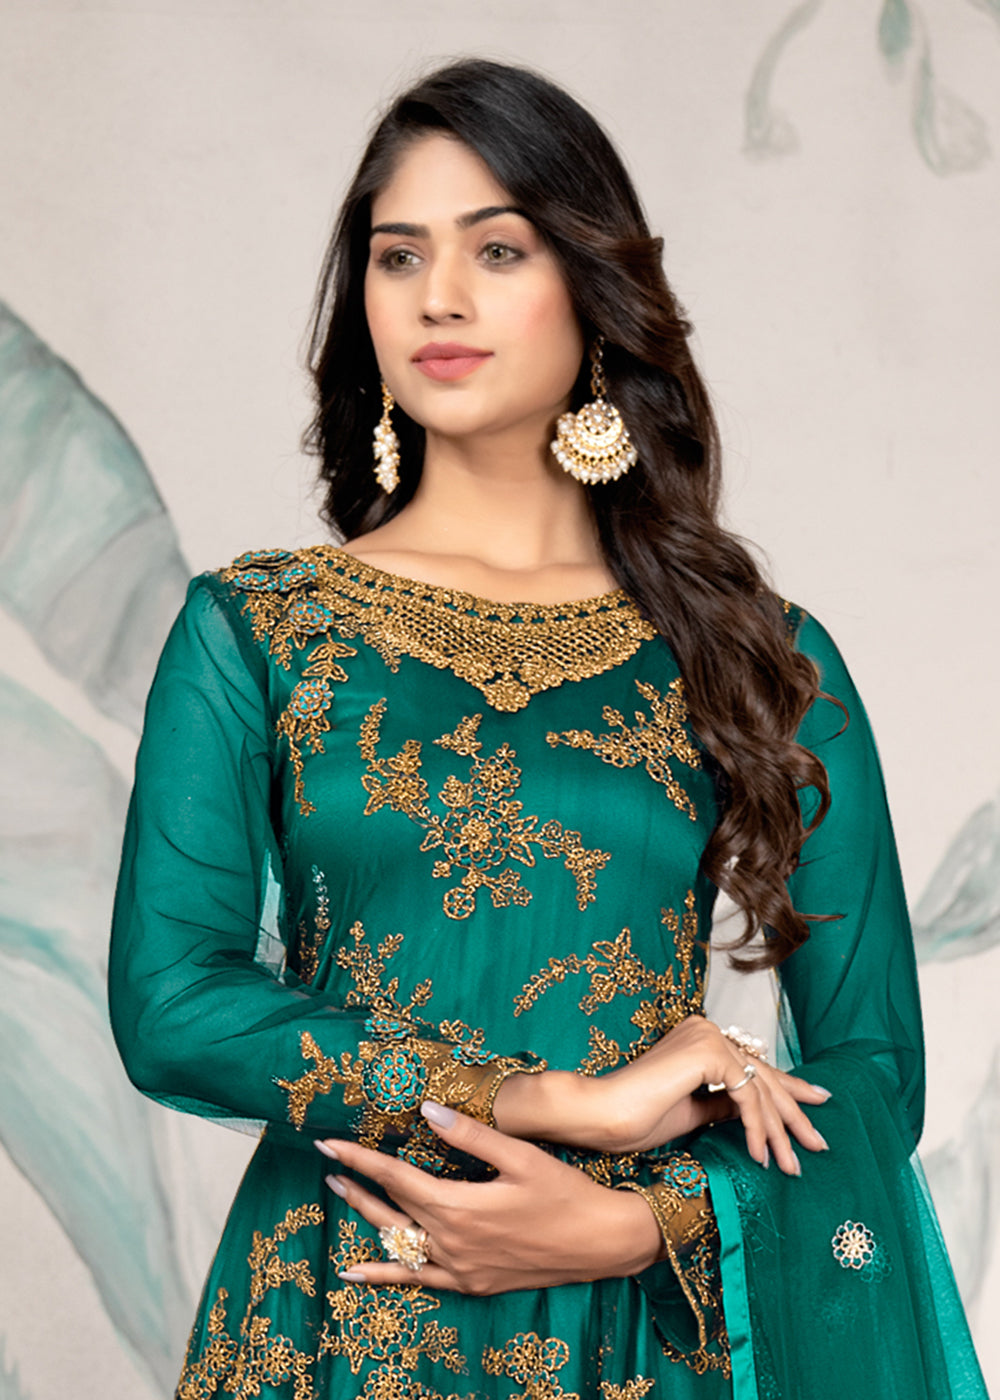 Buy Now Party Wear Green Thread & Sequins Work Anarkali Suit Online in USA, UK, Australia, New Zealand, Canada, Italy & Worldwide at Empress Clothing.